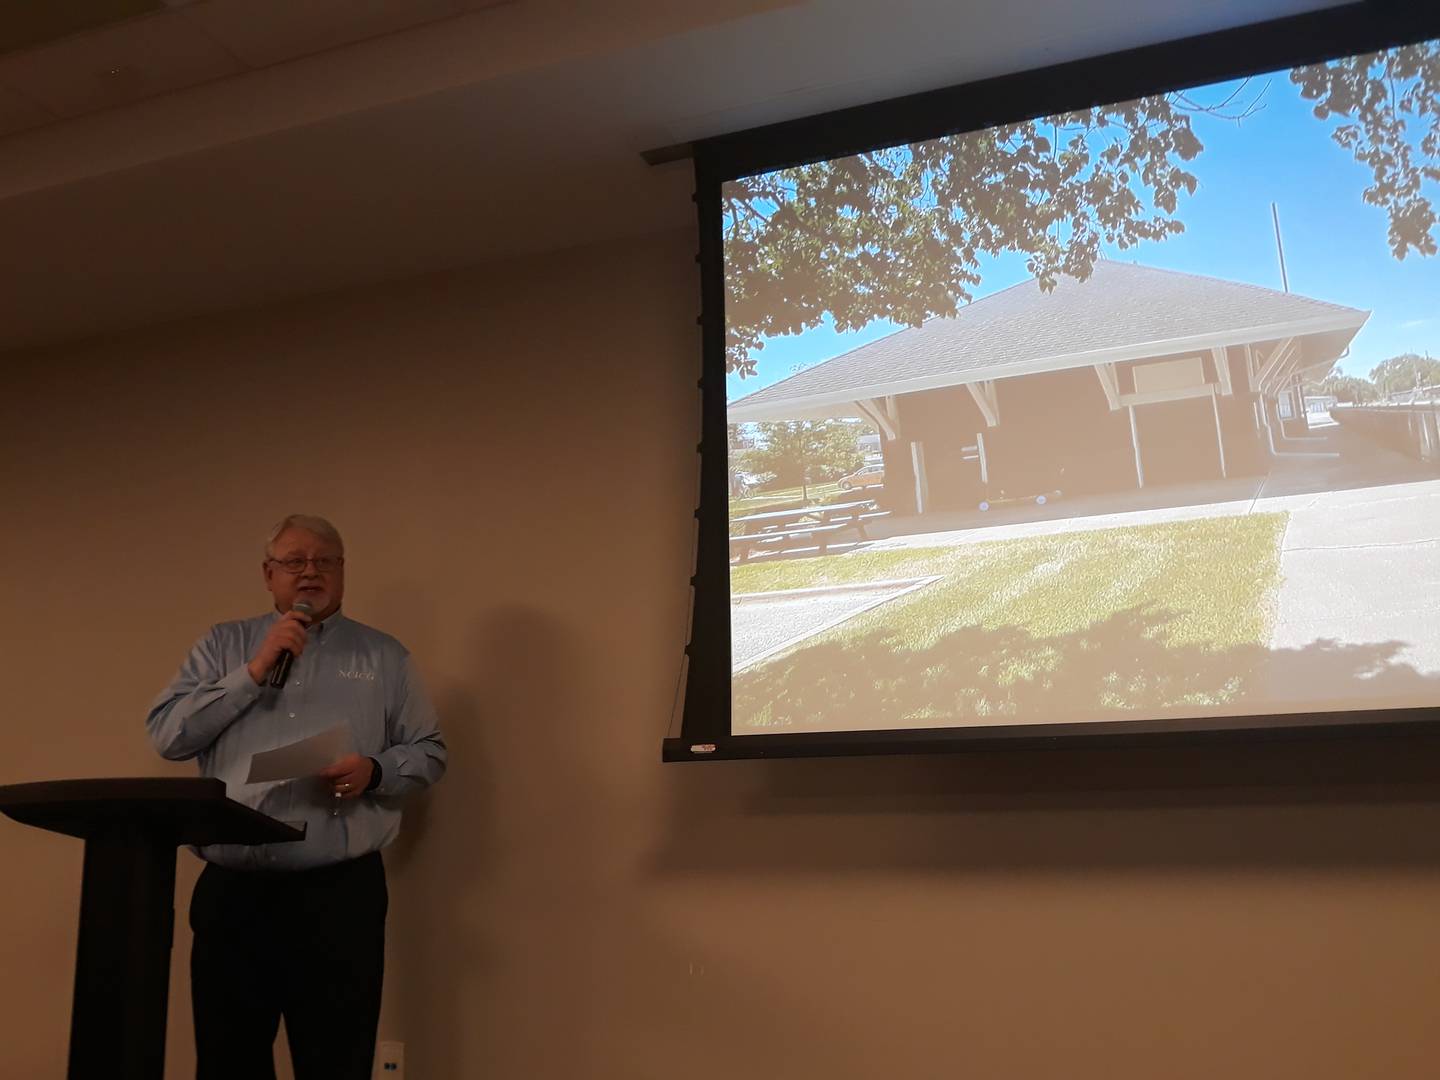 Duane Calbow, economic development planner at North Central Illinois Council of Governments, talks about what consultants will be looking for in future train stations along the proposed Peoria-to-Chicago passenger rail line.